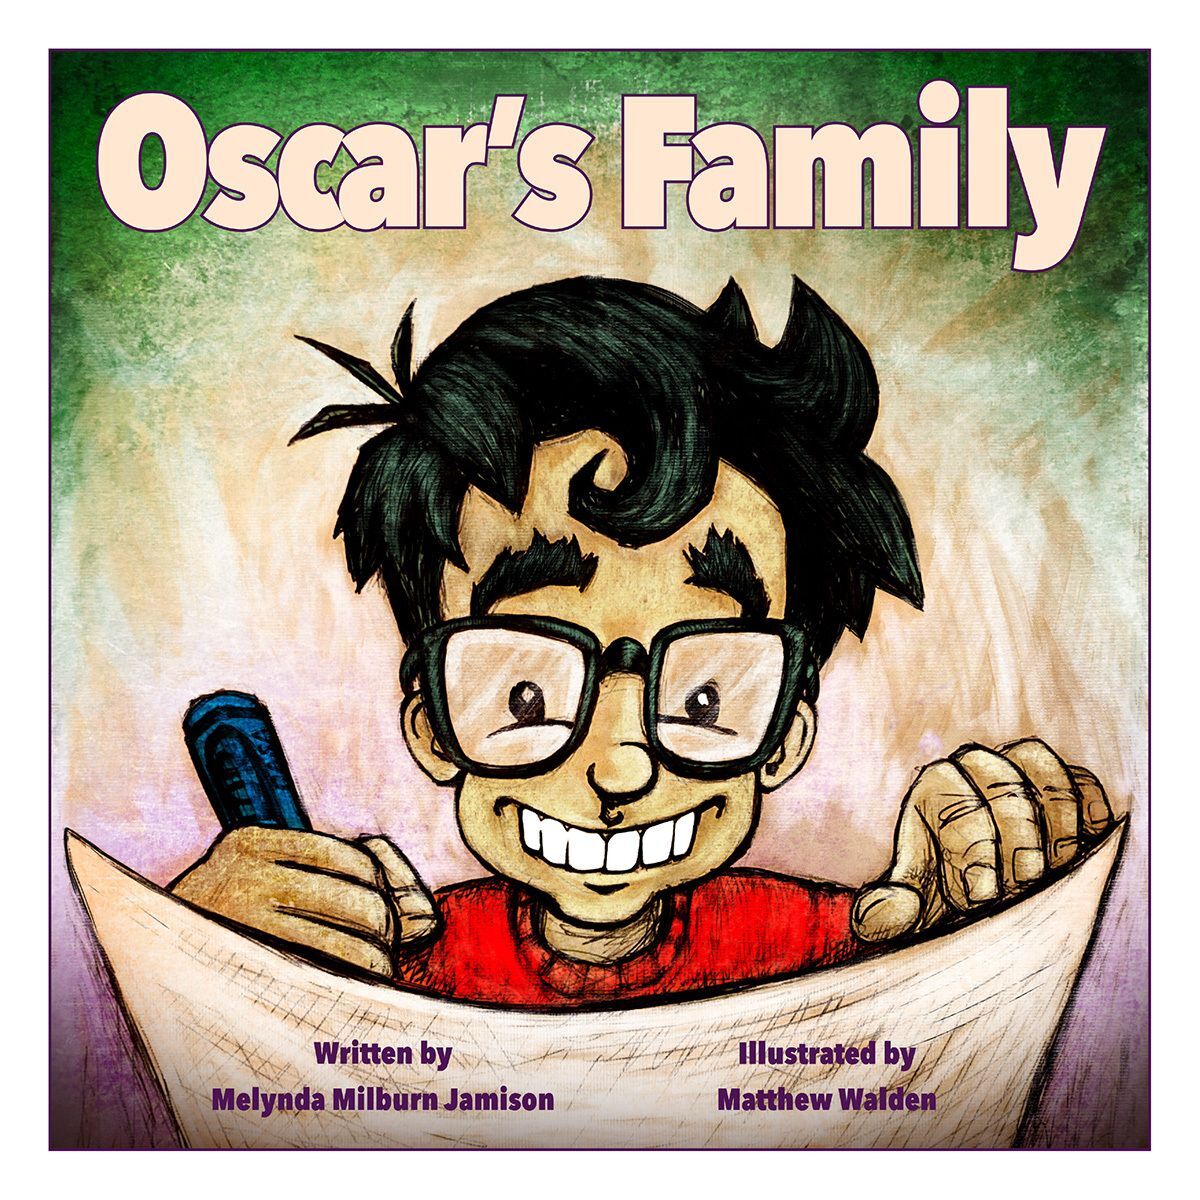 “Oscar’s Family” is a new children’s book.